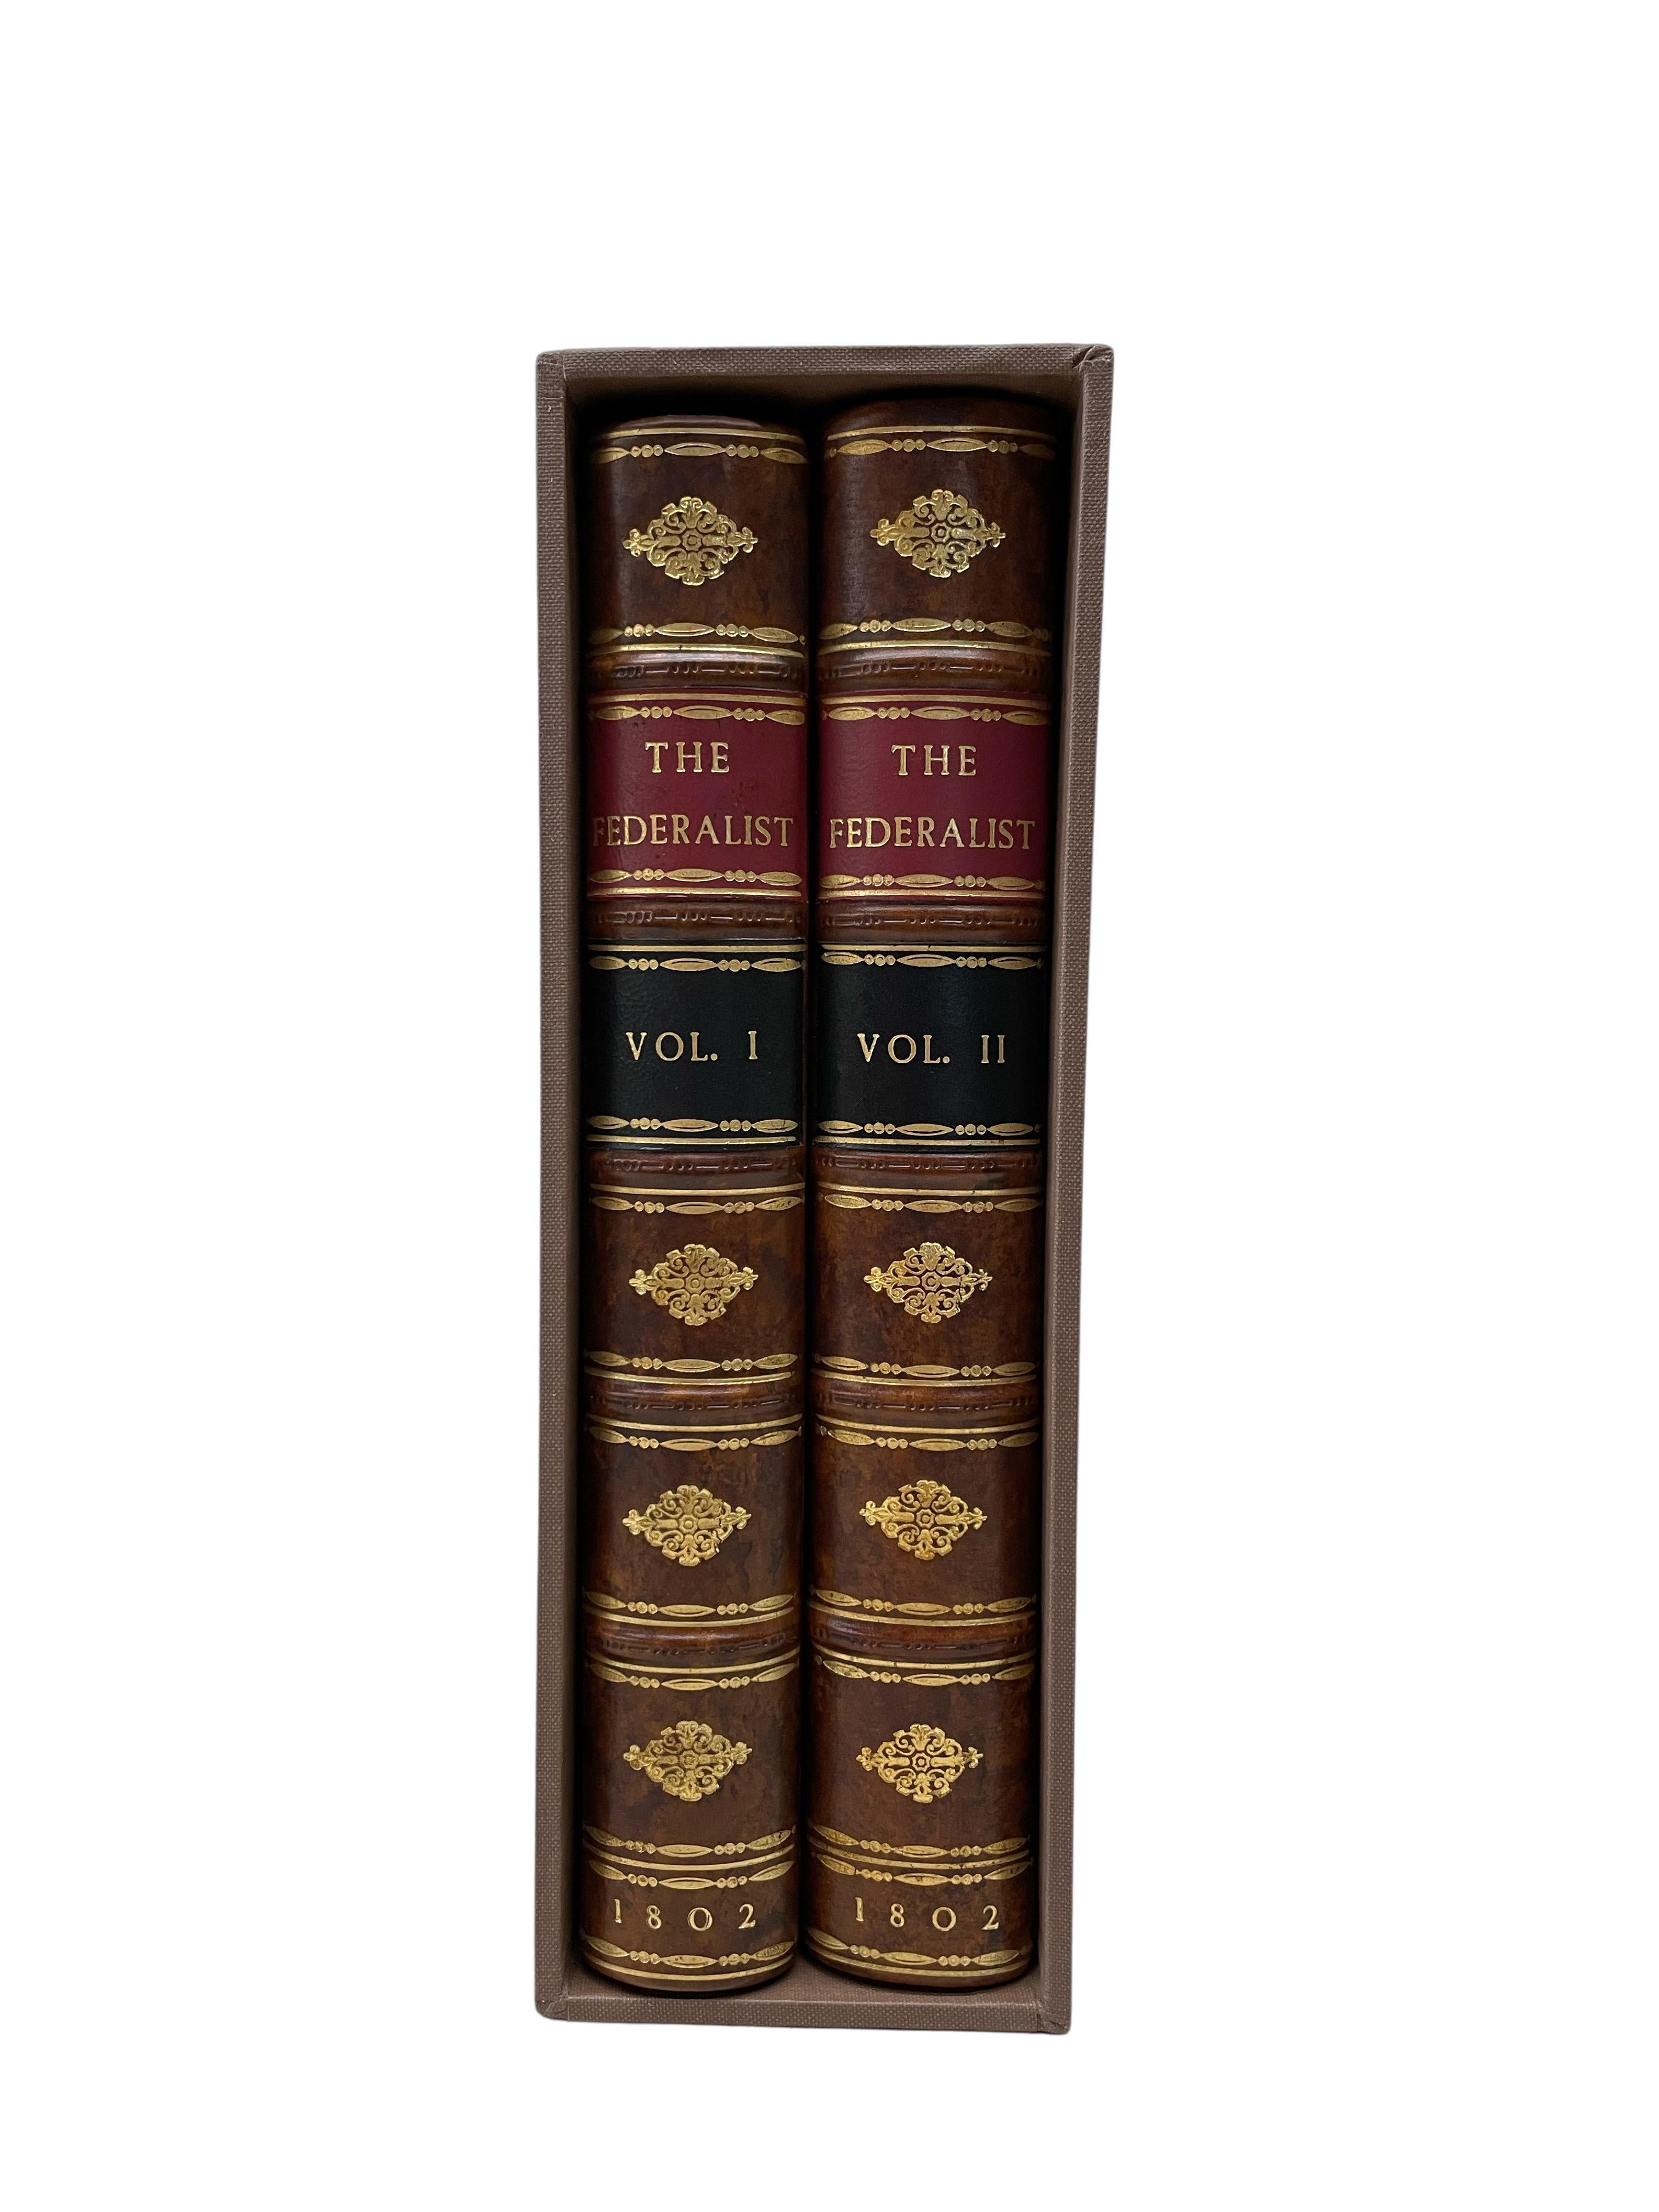 Early 19th Century The Federalist, on the New Constitution by Publius, Second Edition, 2 Vols, 1802 For Sale